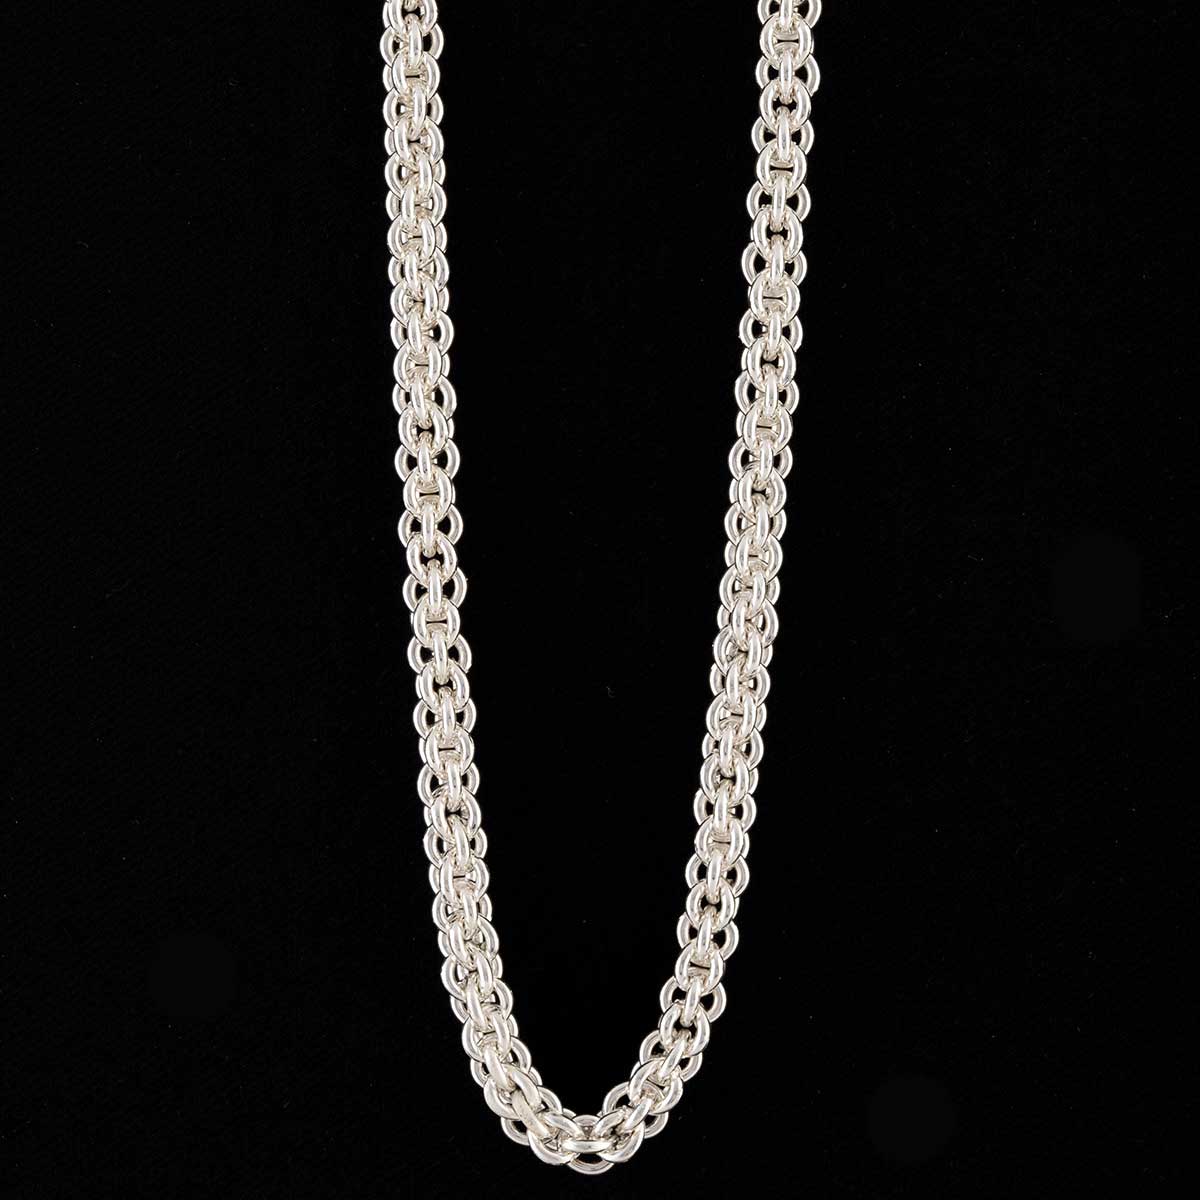 Silver Chain Necklace with Magnetic Clasp